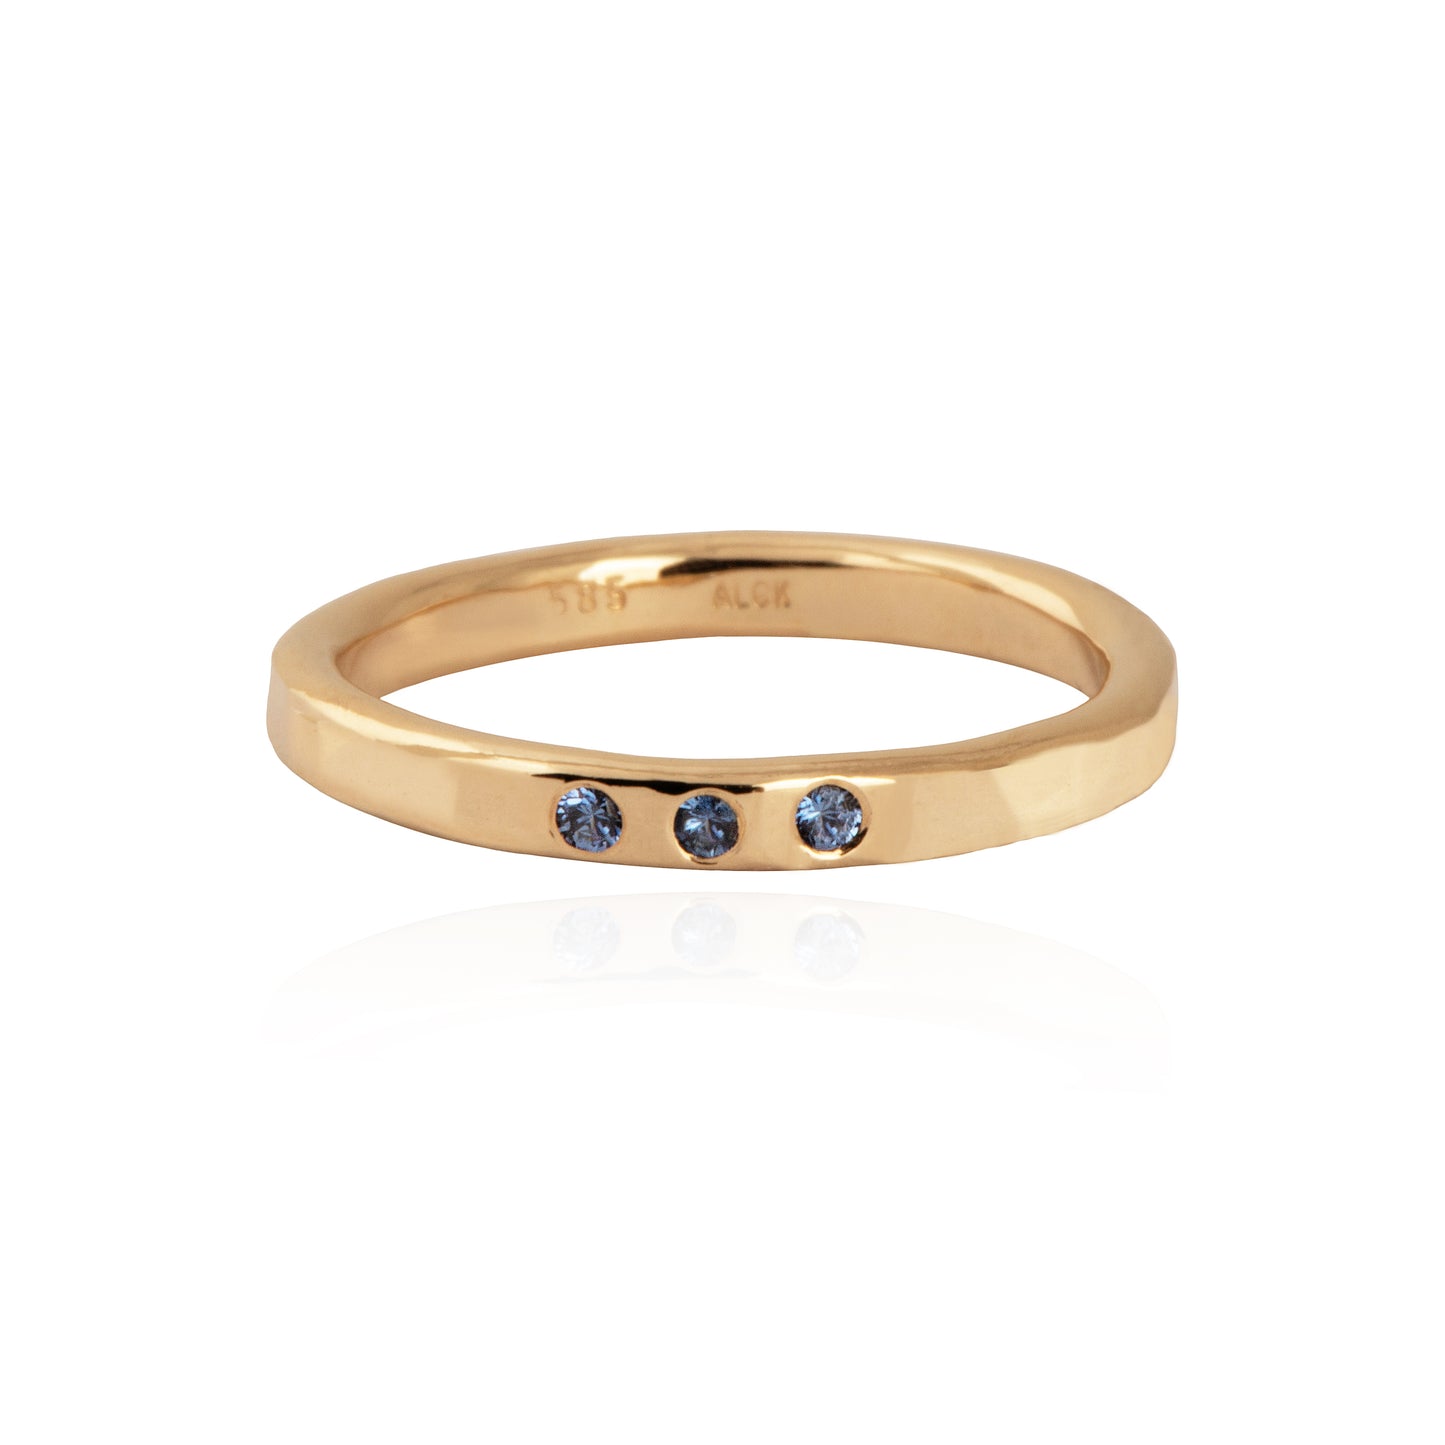 14k gold Hammered Thin Ring w. sapphires